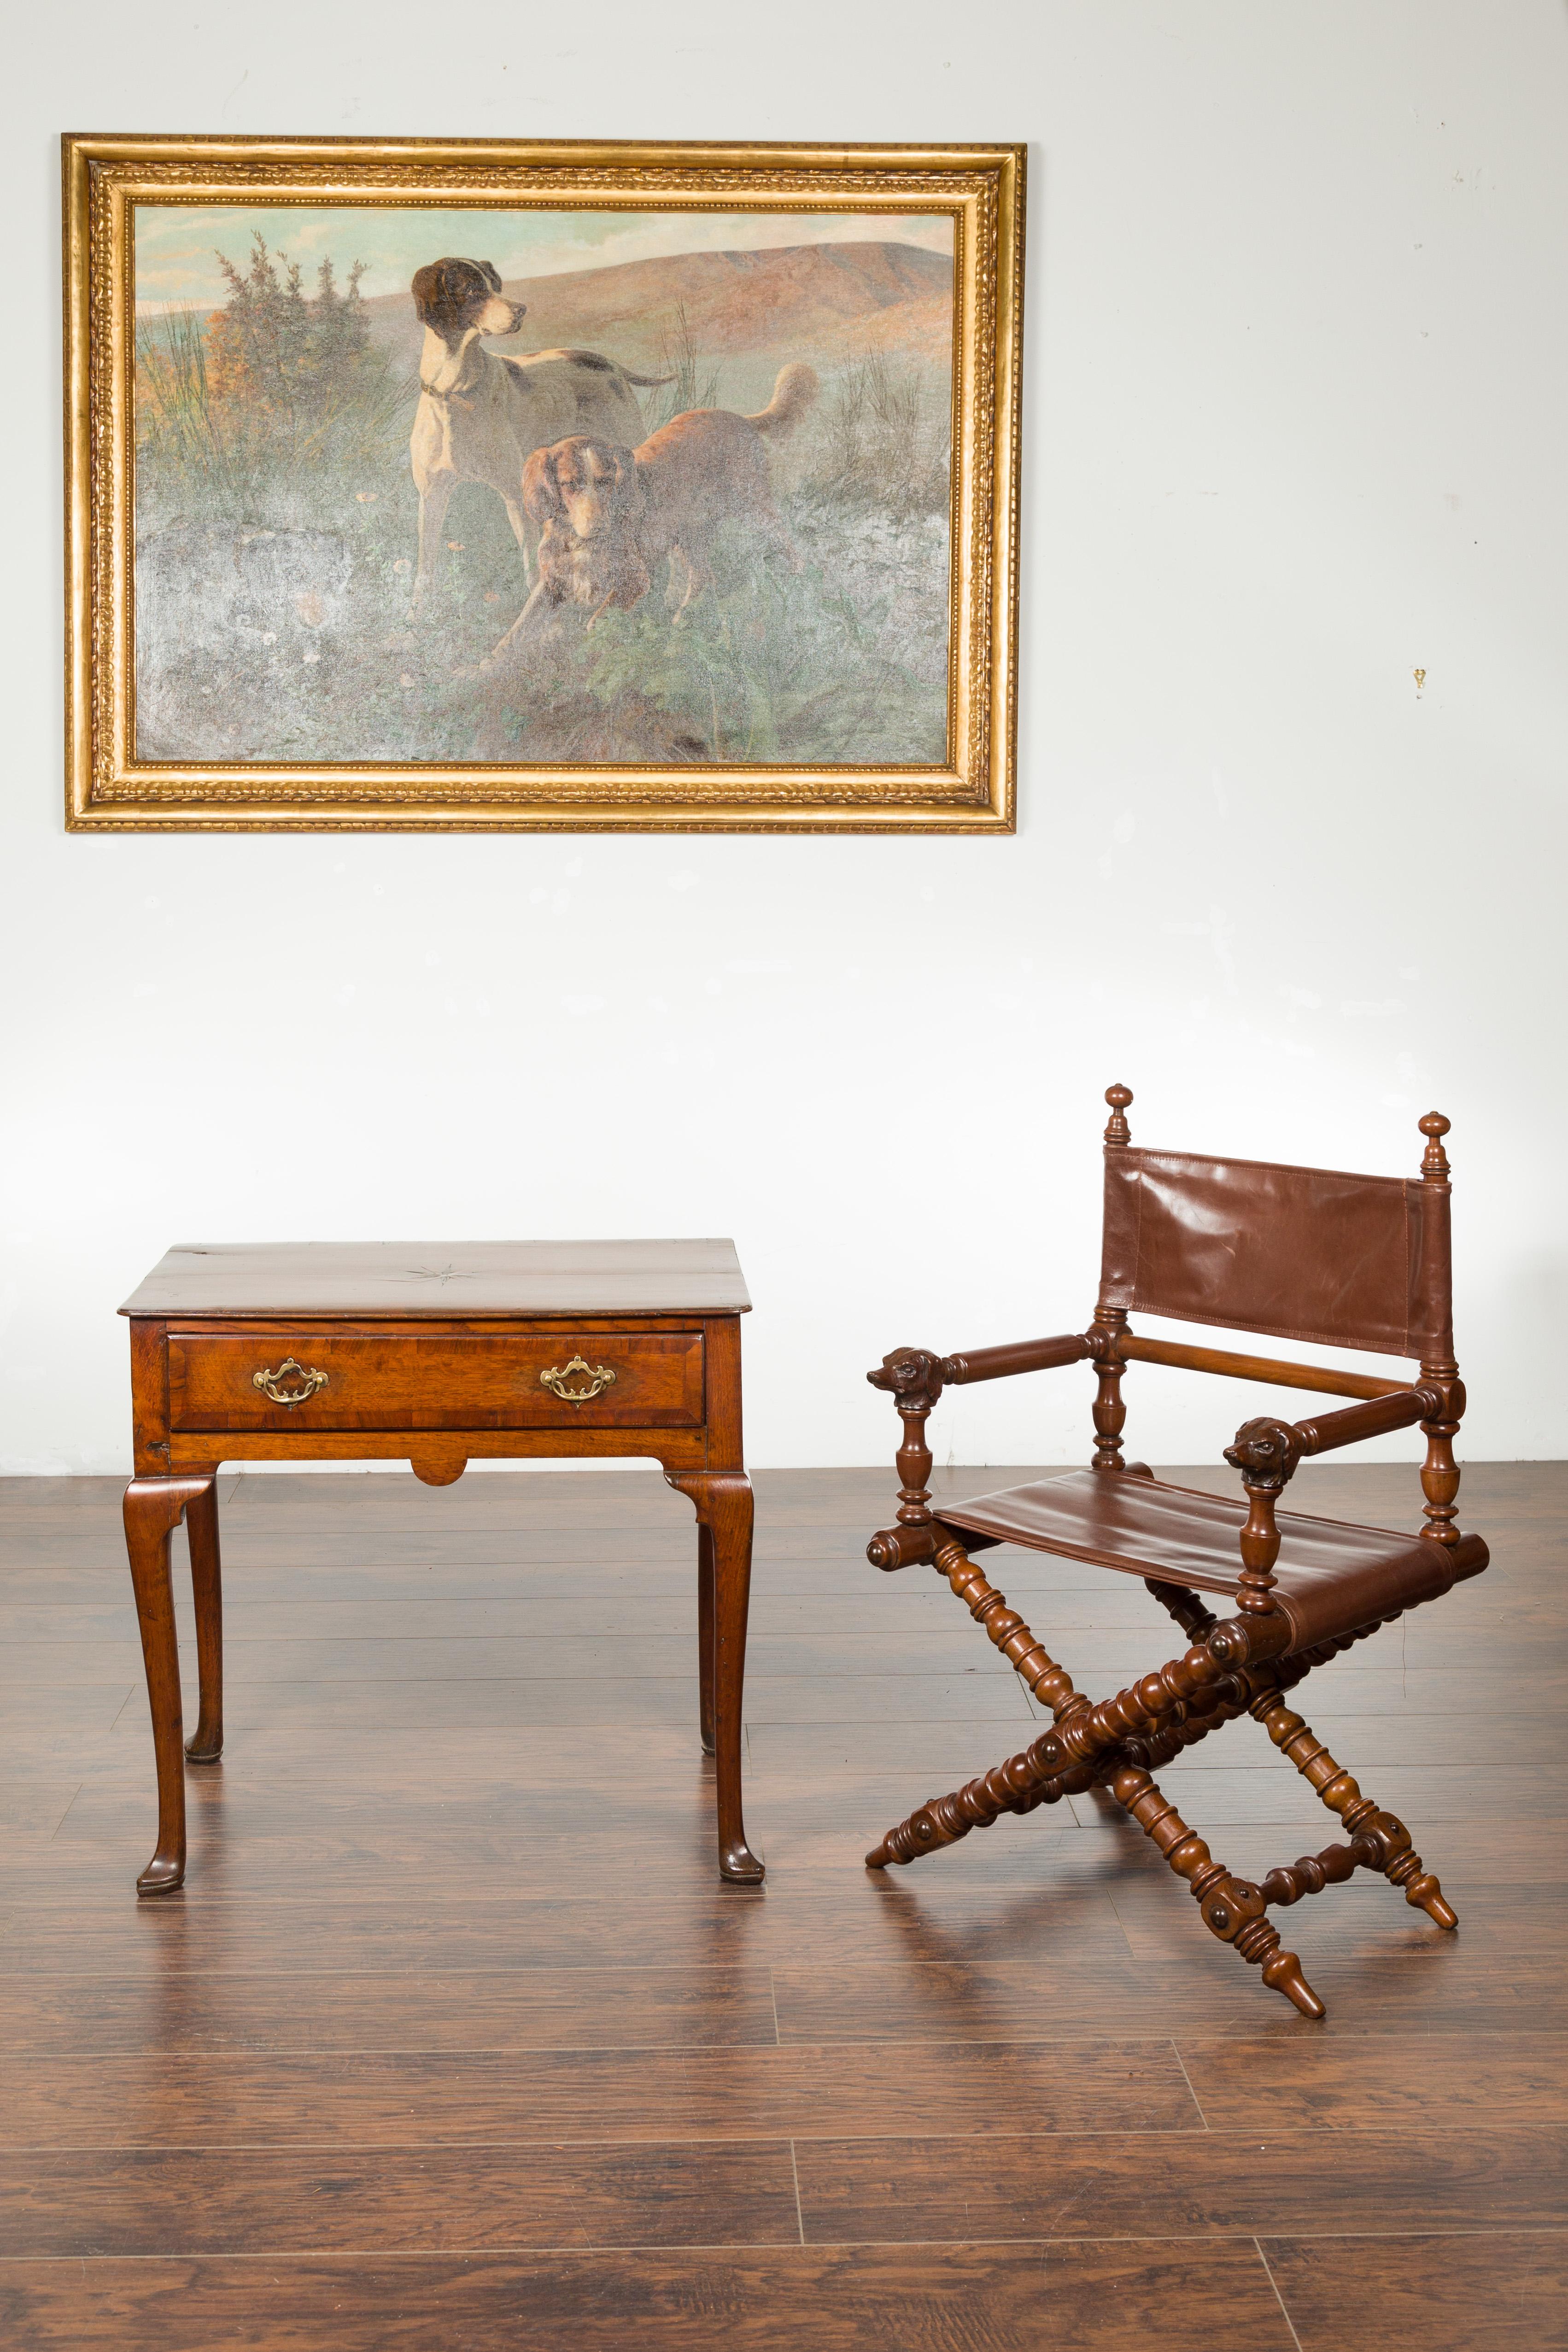 An English George III period oak lowboy from the early 19th century, with star inlay, carved apron and pad feet. Created in England during the first quarter of the 19th century, this oak lowboy features a rectangular top with rounded corners in the